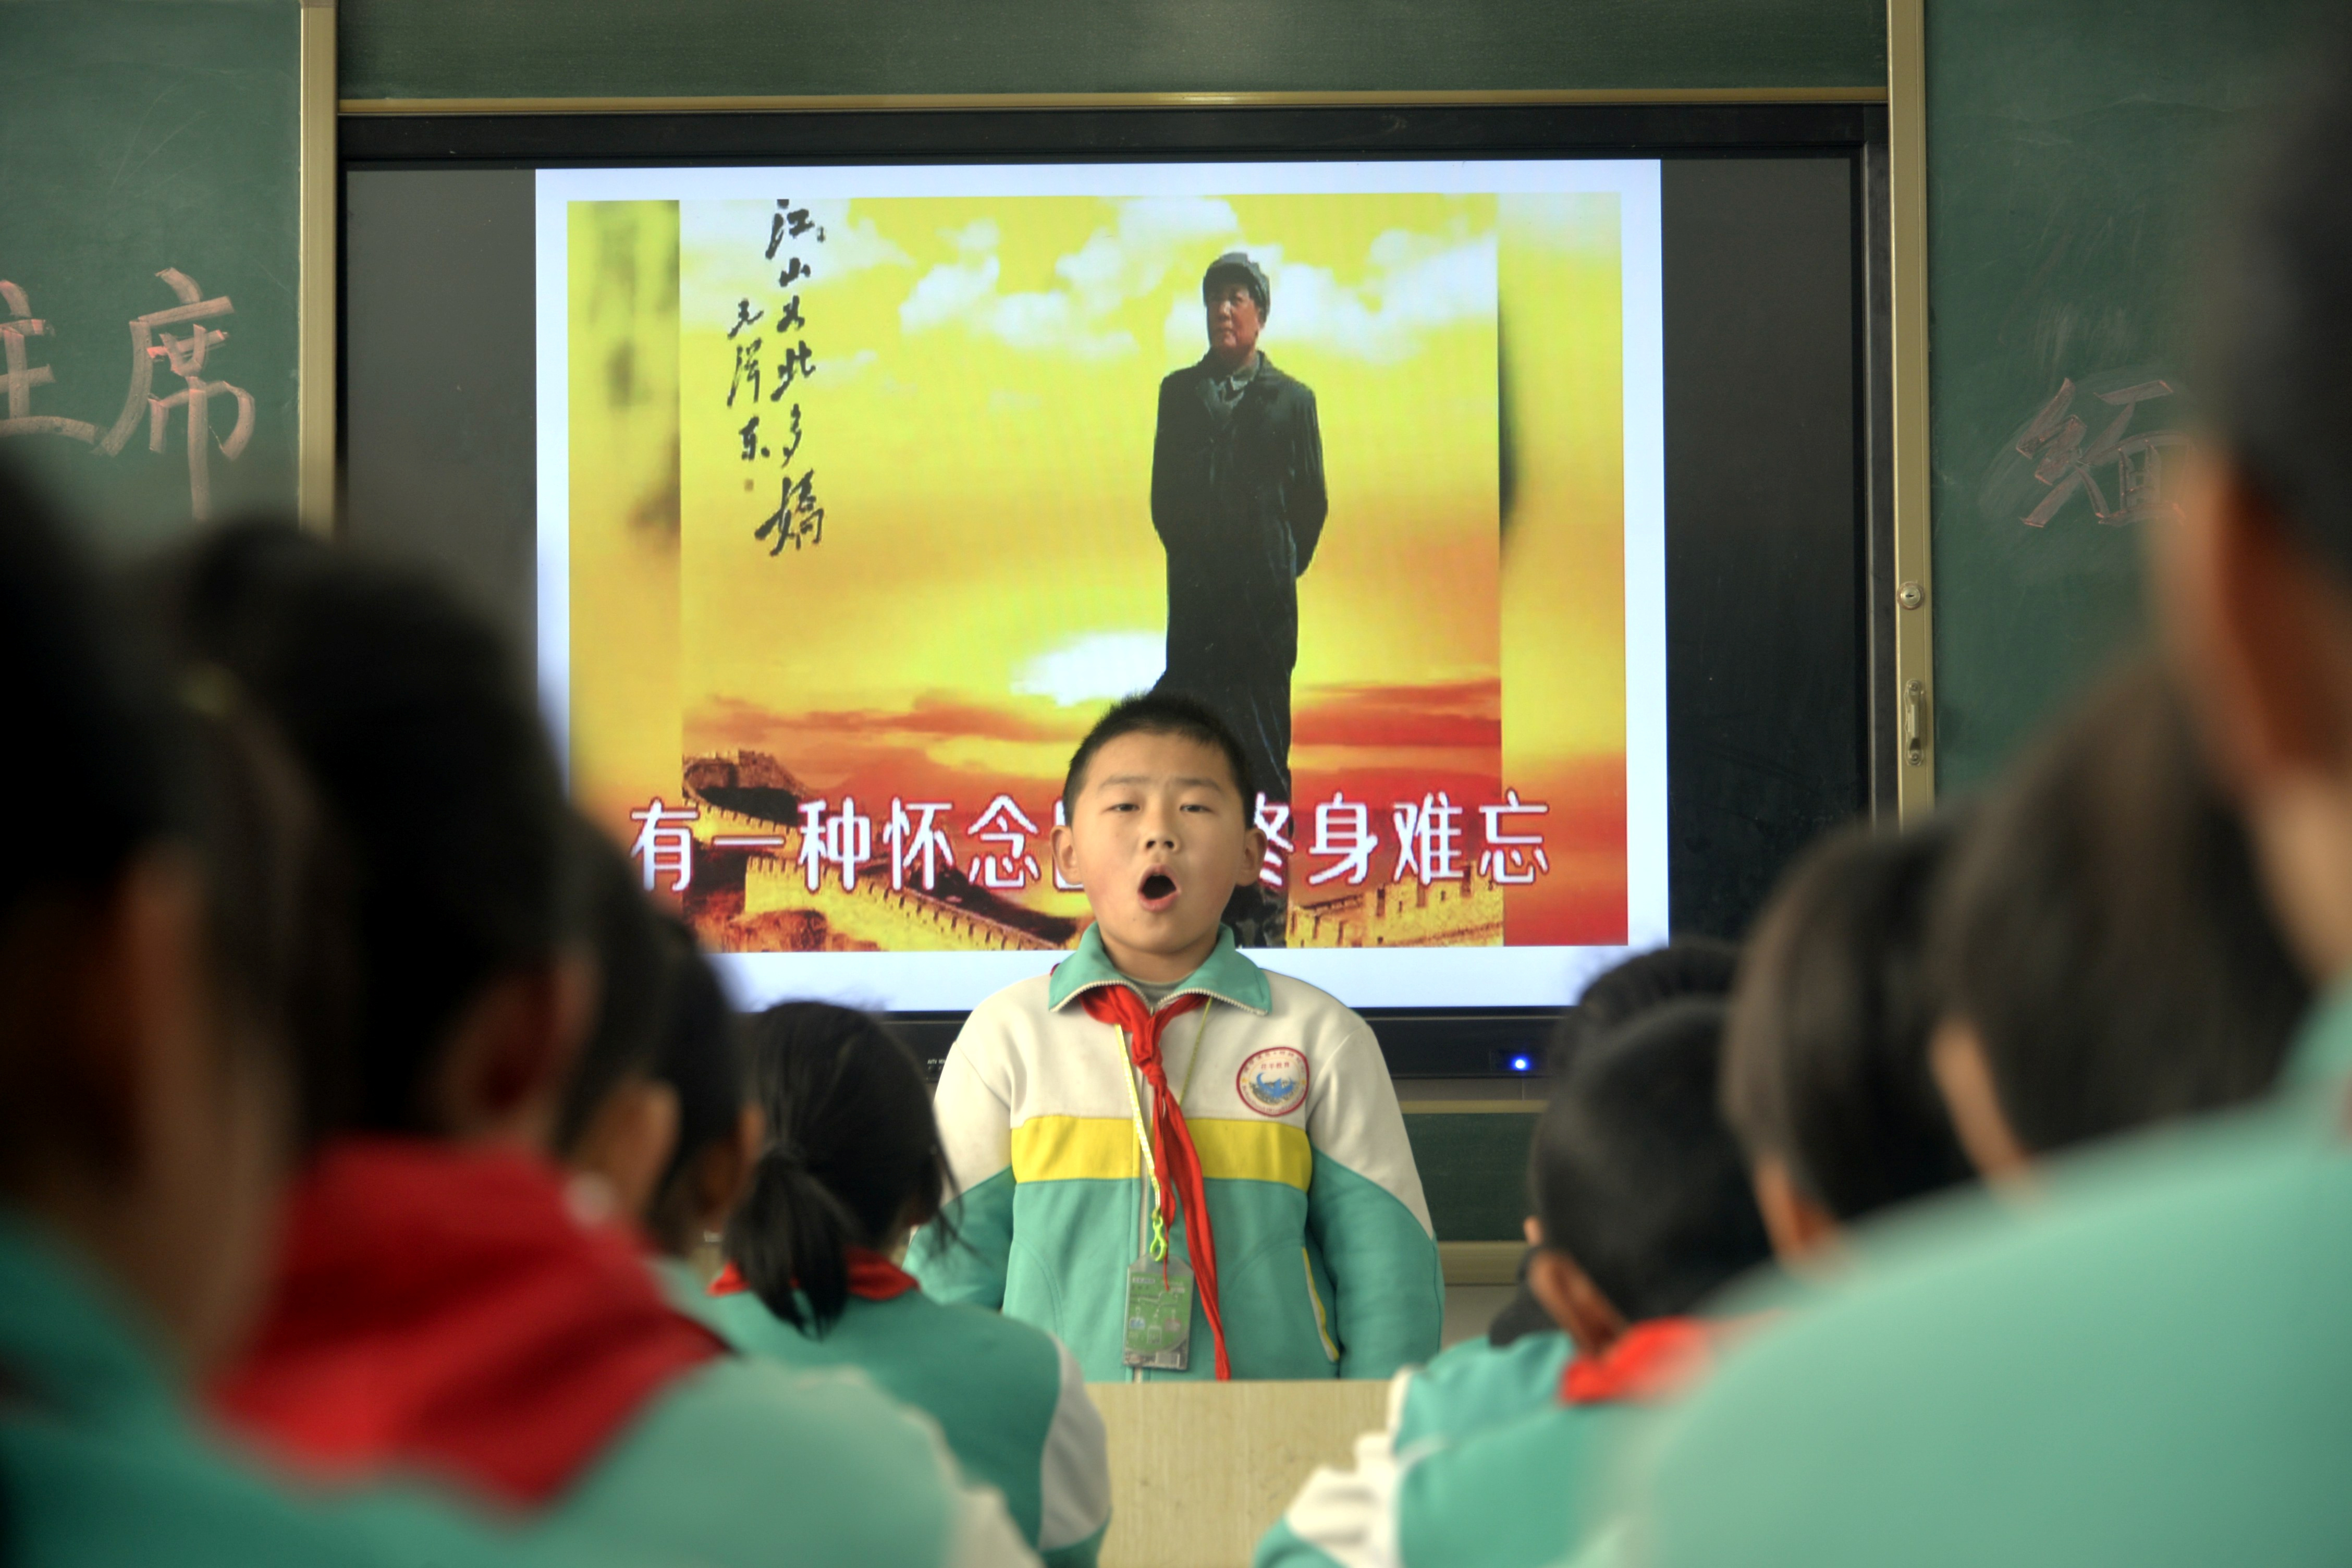 Students recite a poem by China's late Chairman Mao Zedong on the 125th anniversary of Mao's birthday, at a primary school in Liaocheng